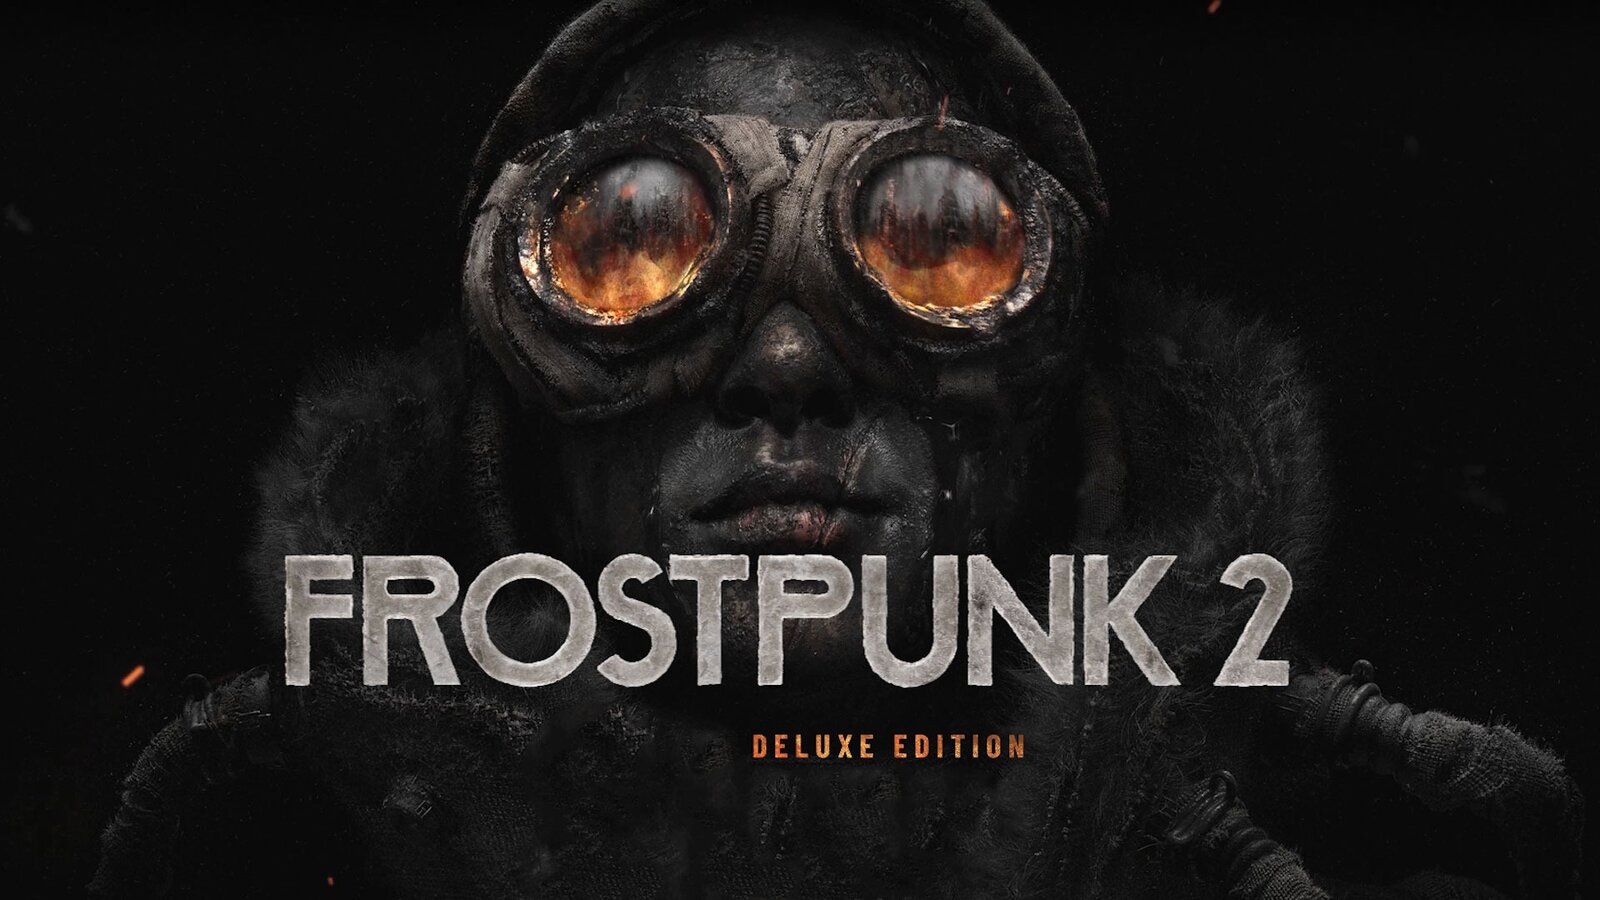 Frostpunk 2 - Deluxe Edition